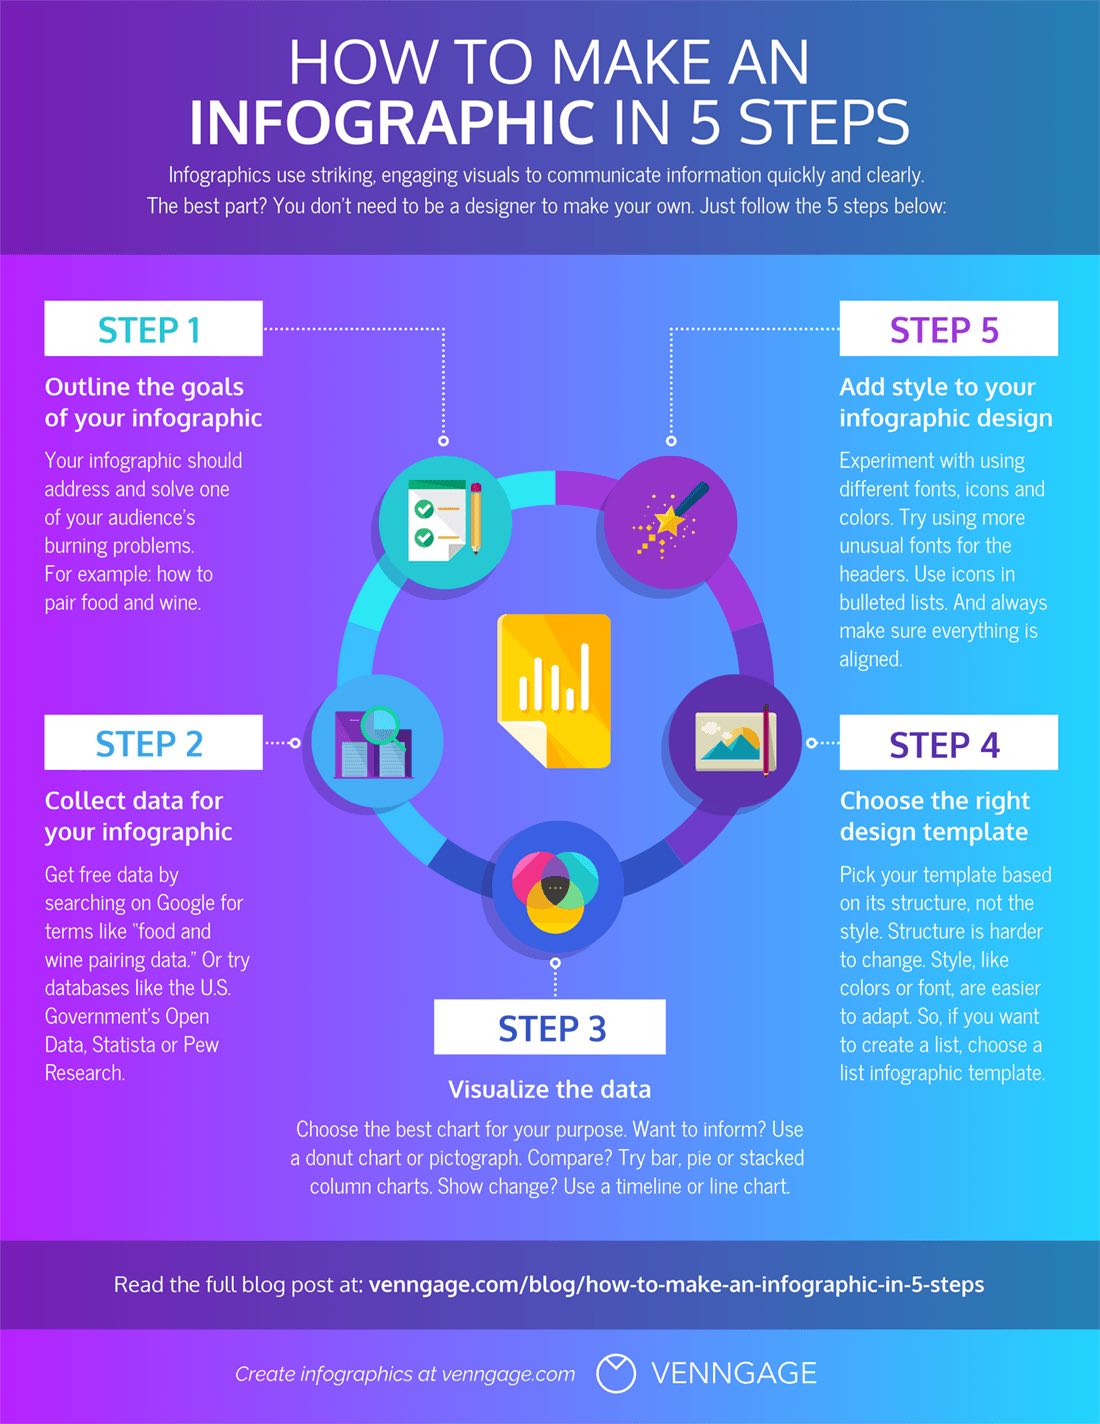 b"How to Create Infographics Thatll Supercharge Your Content Marketing Strategy in 2019 ..."